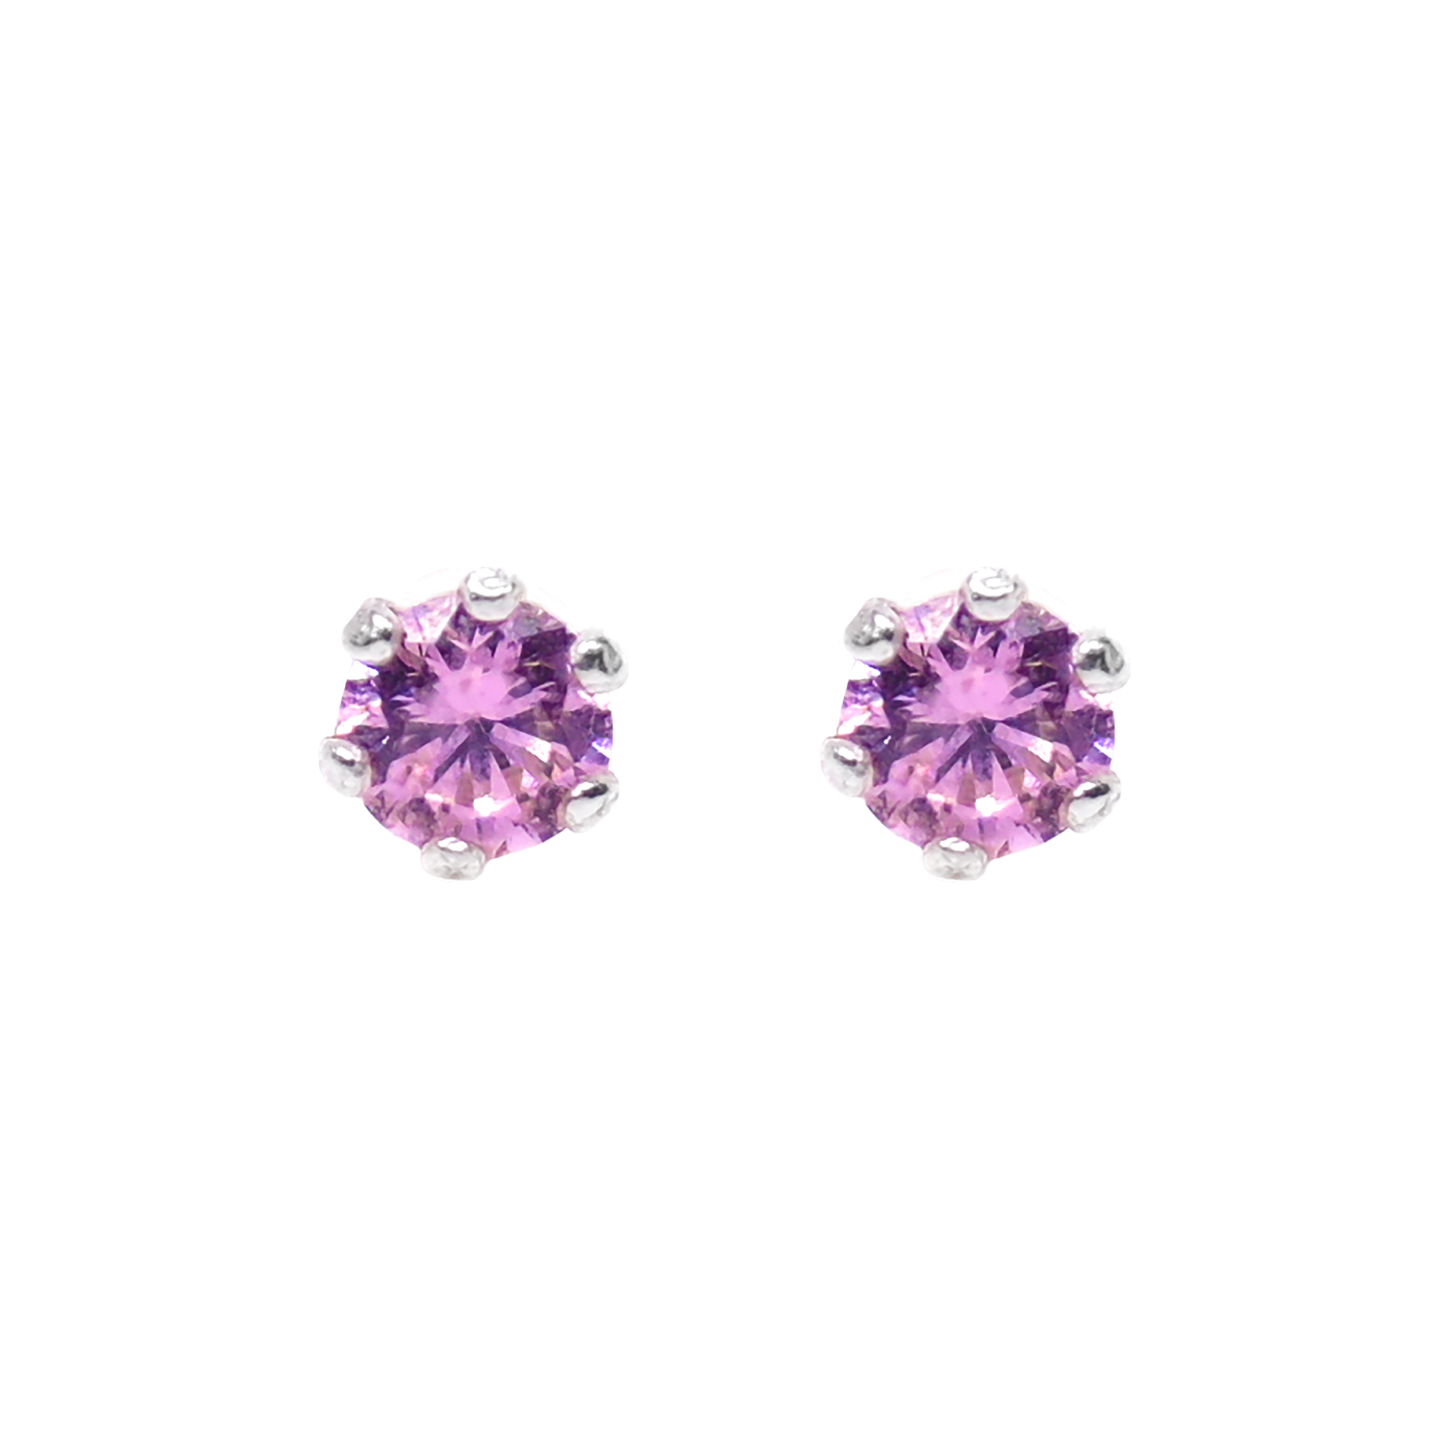 Ontique 925 Silver Lilac Studs Earrings For Women